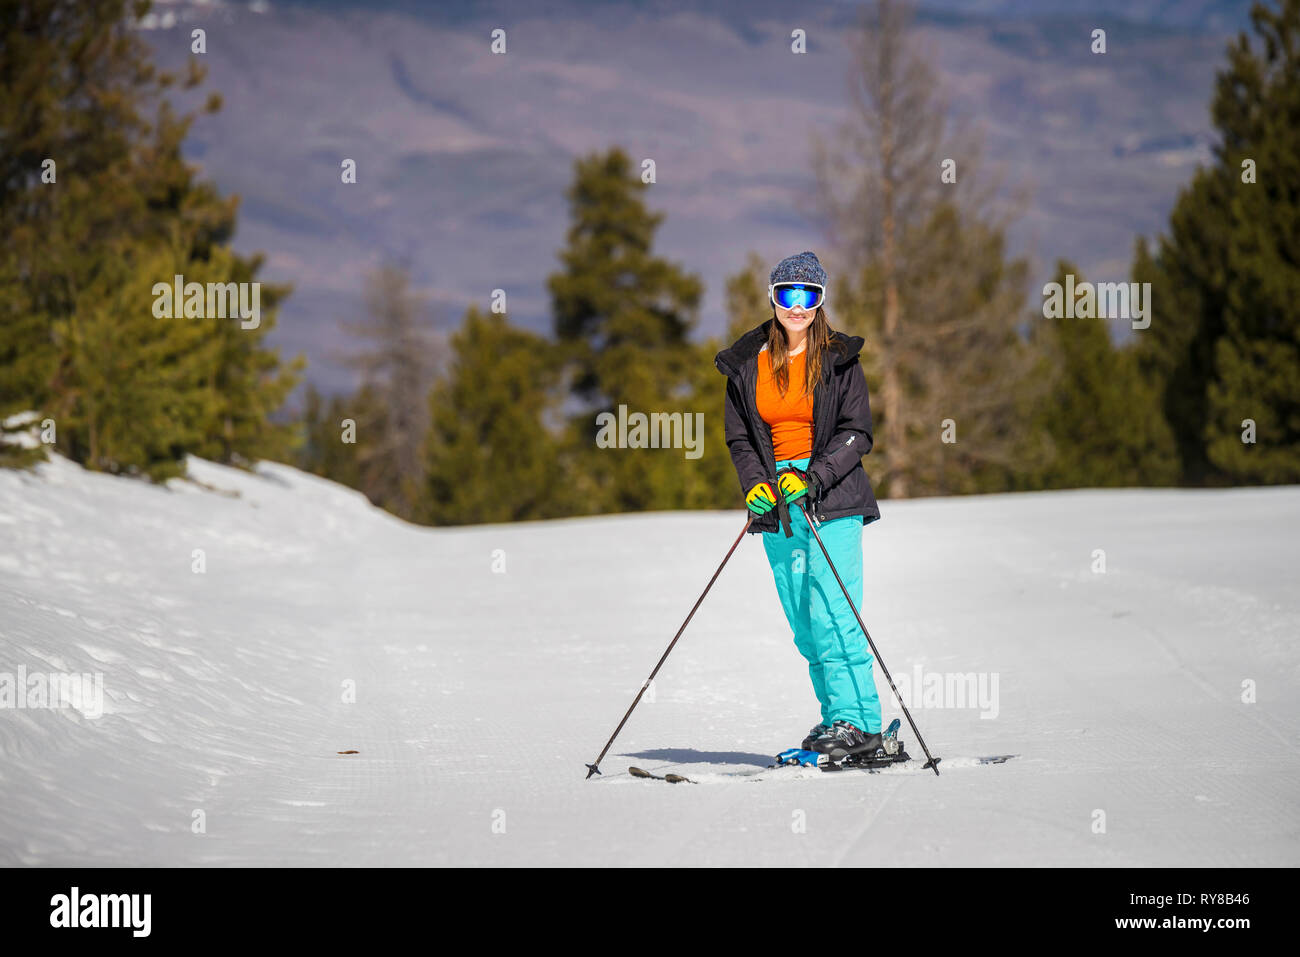 Woman skiing on snow covered field against mountain in forest Stock Photo